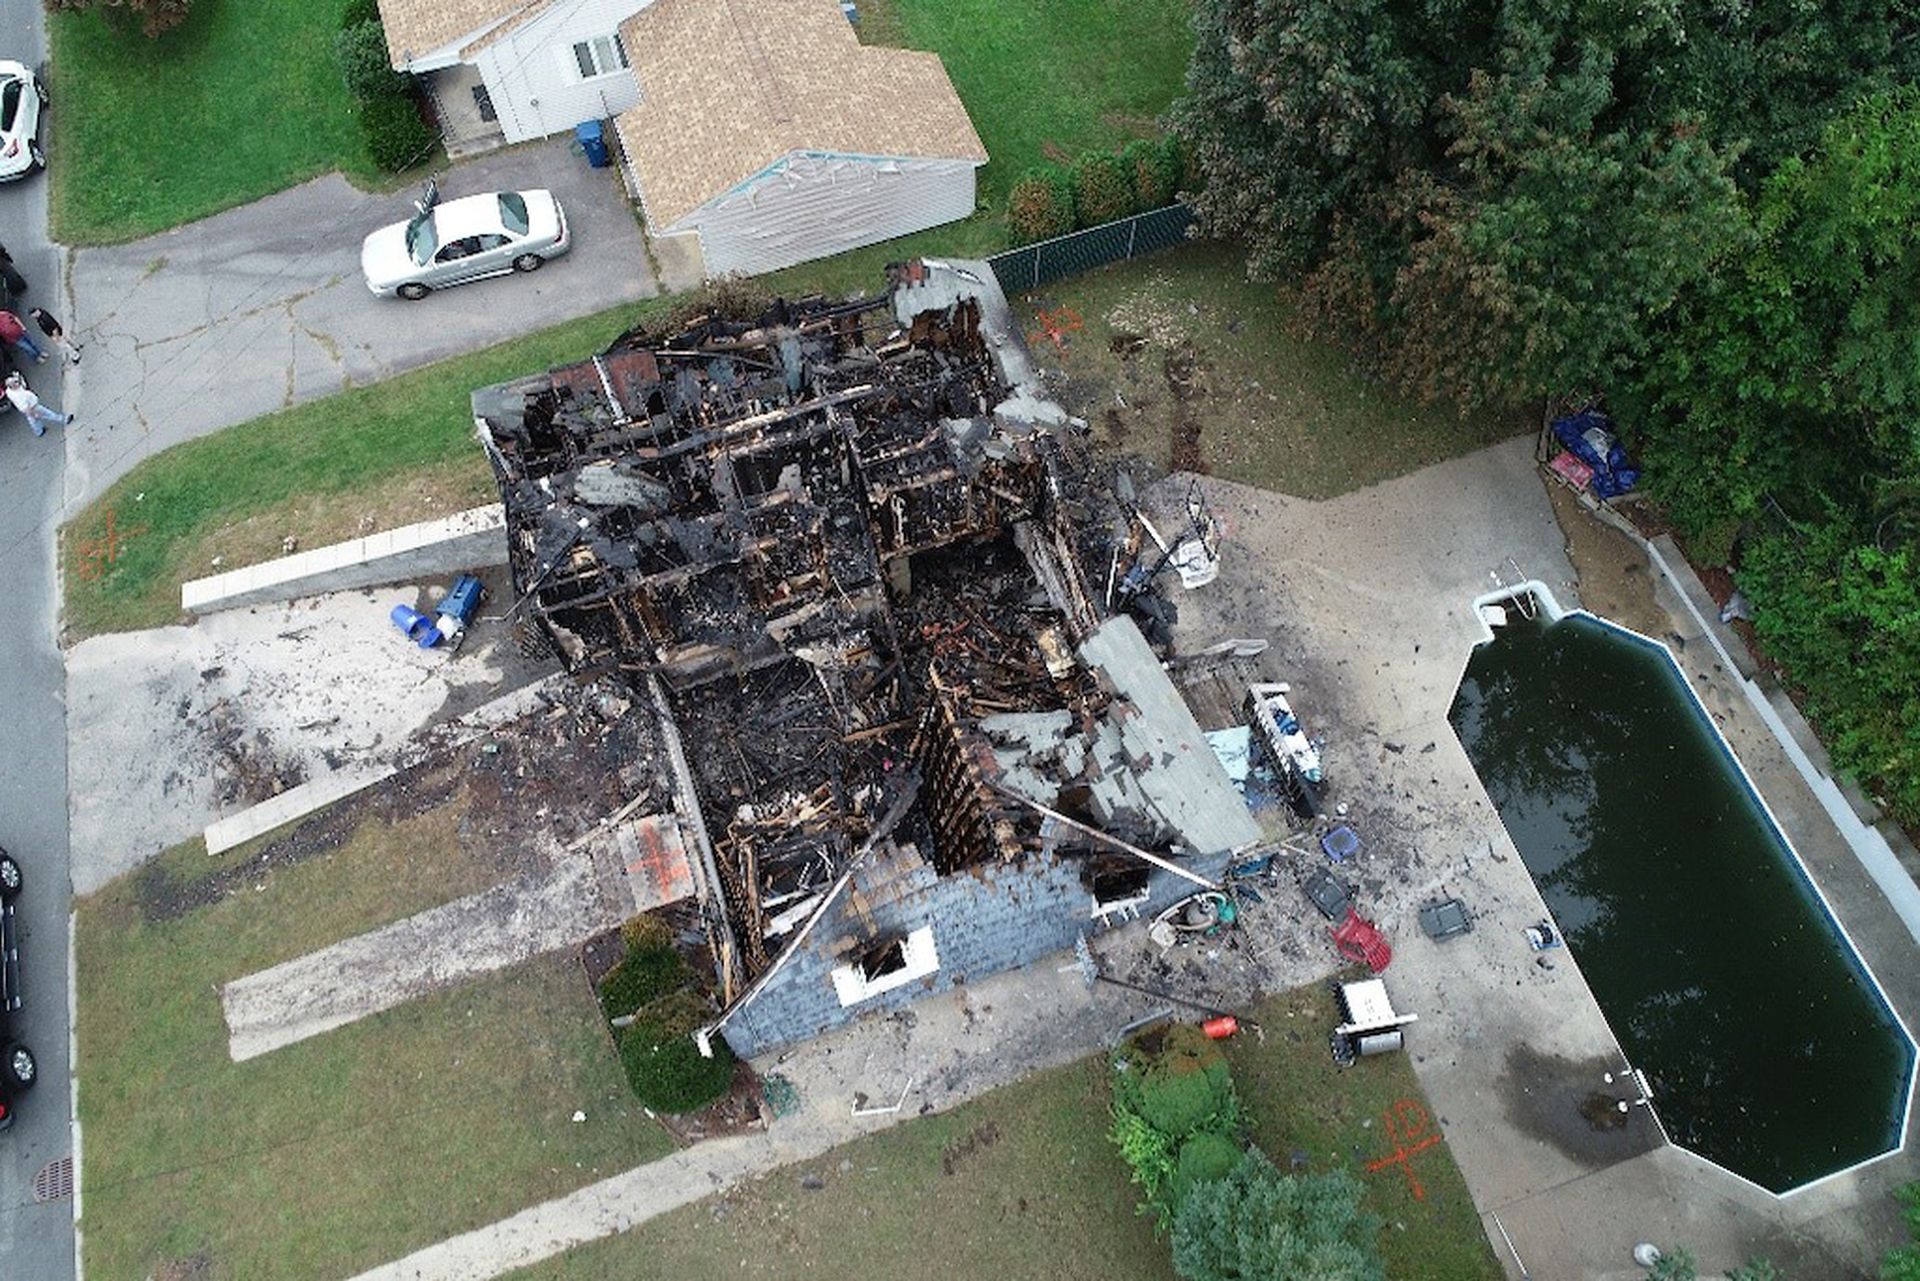 Aerial view of a burned-out home impacted by the Sept. 13, 2018 natural explosion in Merrimack Valley, Mass. Today’s columnist, Lesley Carhart of Dragos, writes about how many in the cybersecurity community first thought this event was the result of a cyberattack. While that wasn’t true, threats of cyberattacks on critical infrastructure are still ...